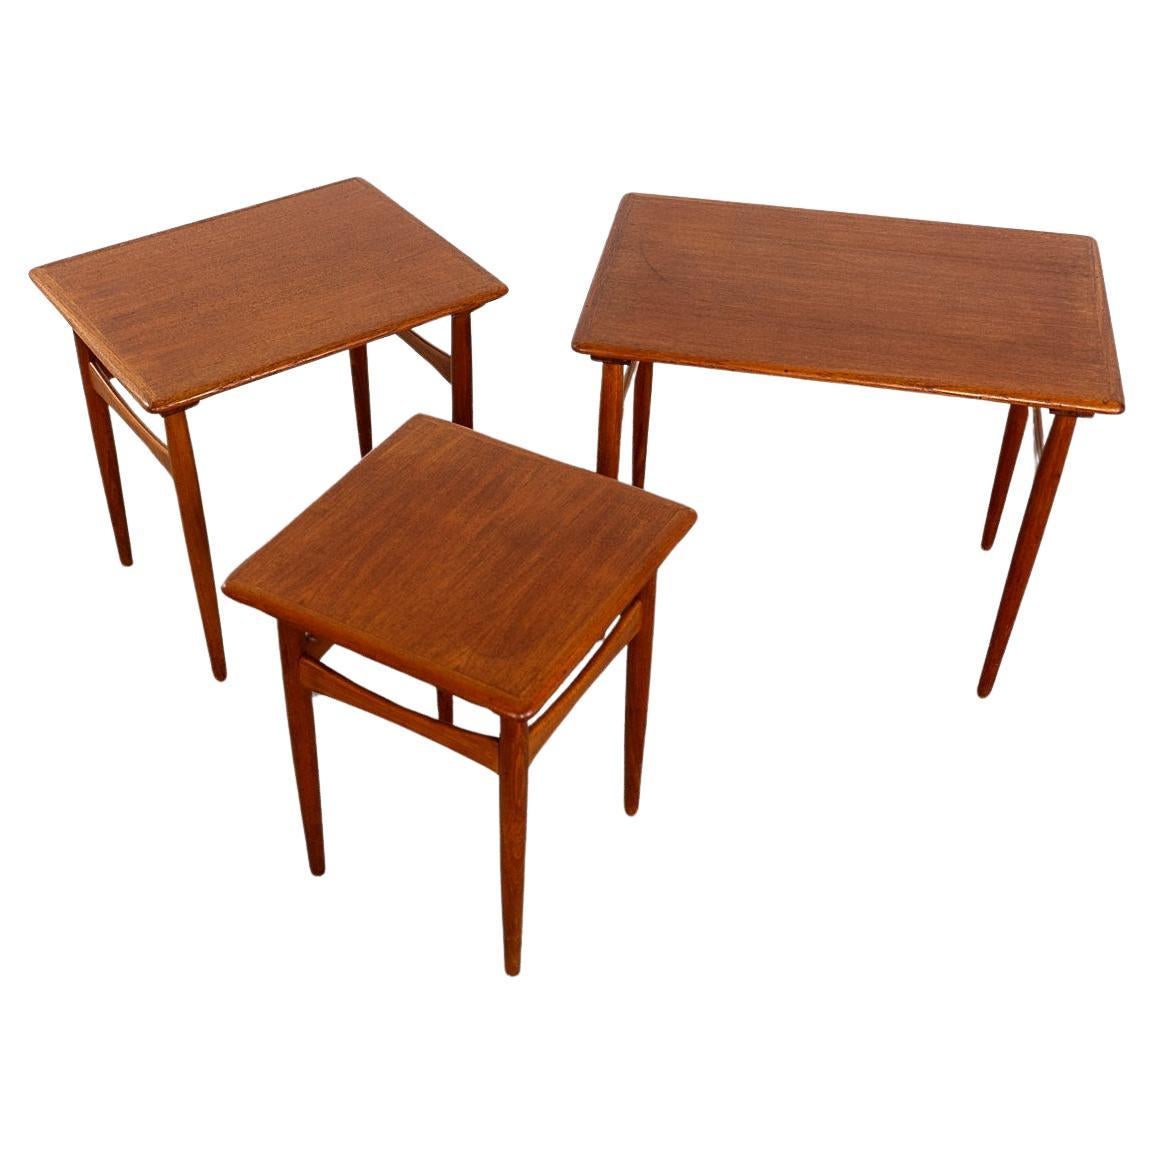 Teak nesting tables, circa 1960's. Space saving design, the footprint of 1 table with the functionality of 3! Tapered legs and bow crossbars make these unique! 

Unrestored item with option to purchase in restored condition for an additional $200